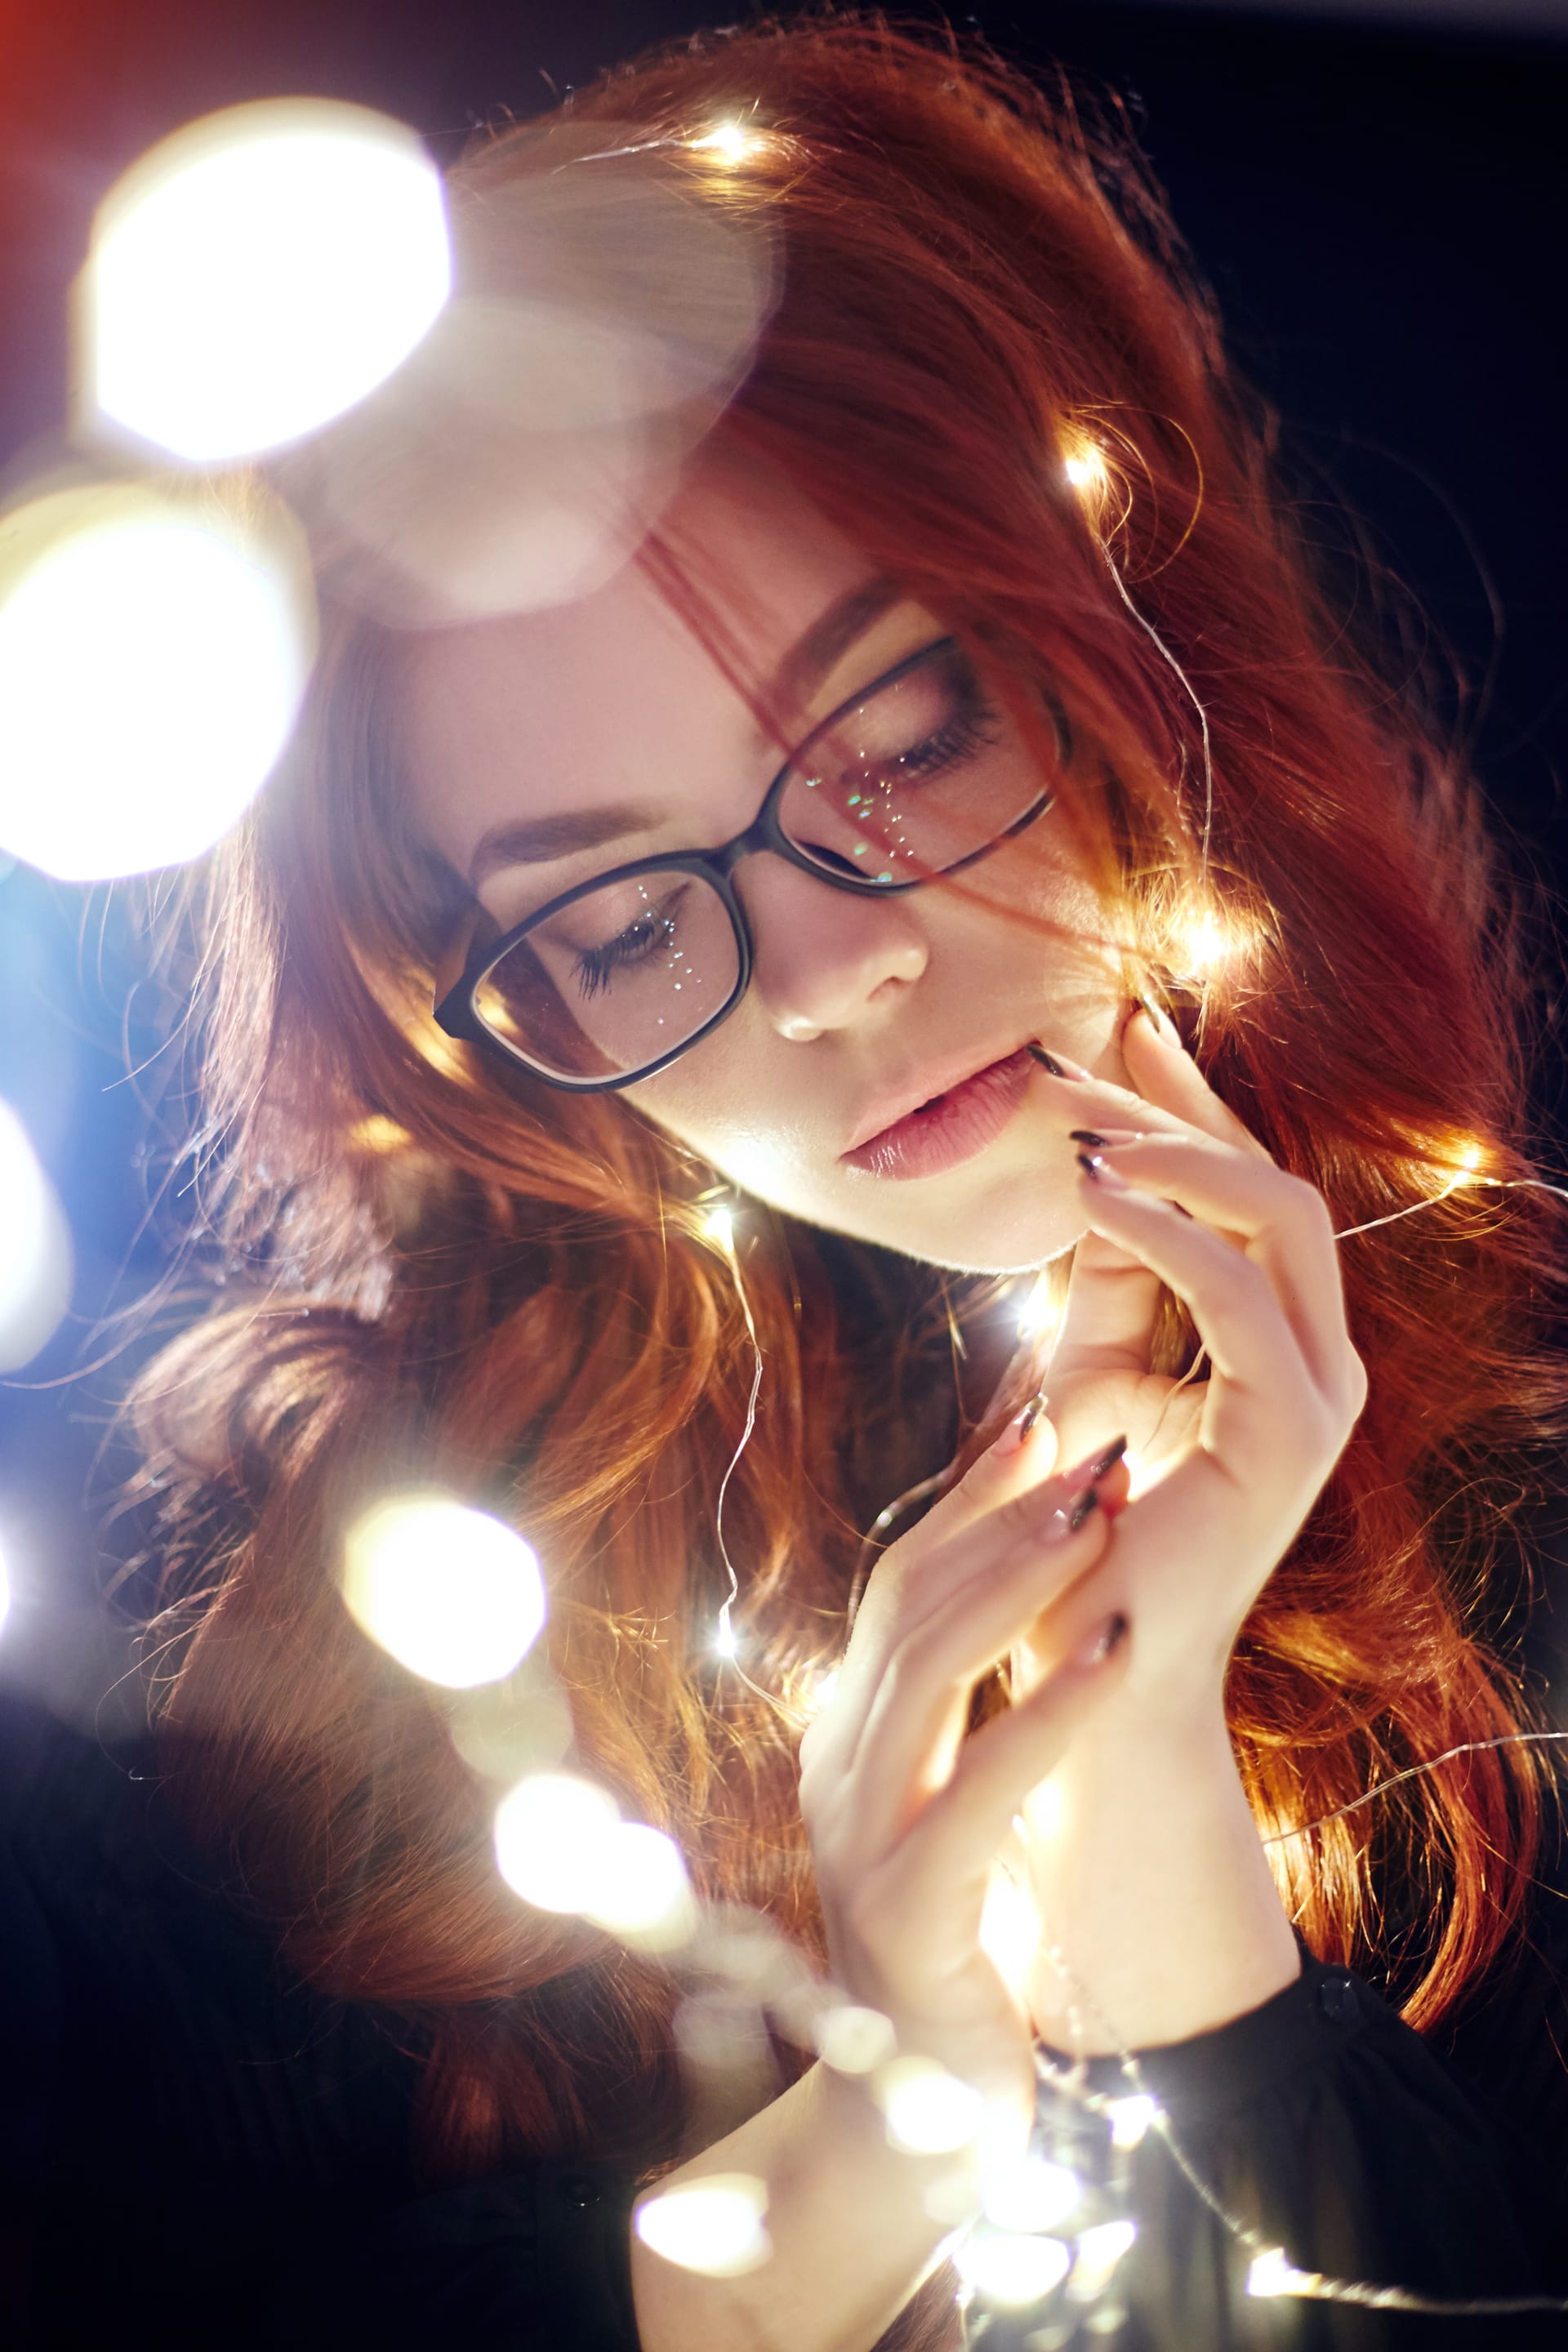 Art portrait woman with red hair lights beautiful pictures of single woman